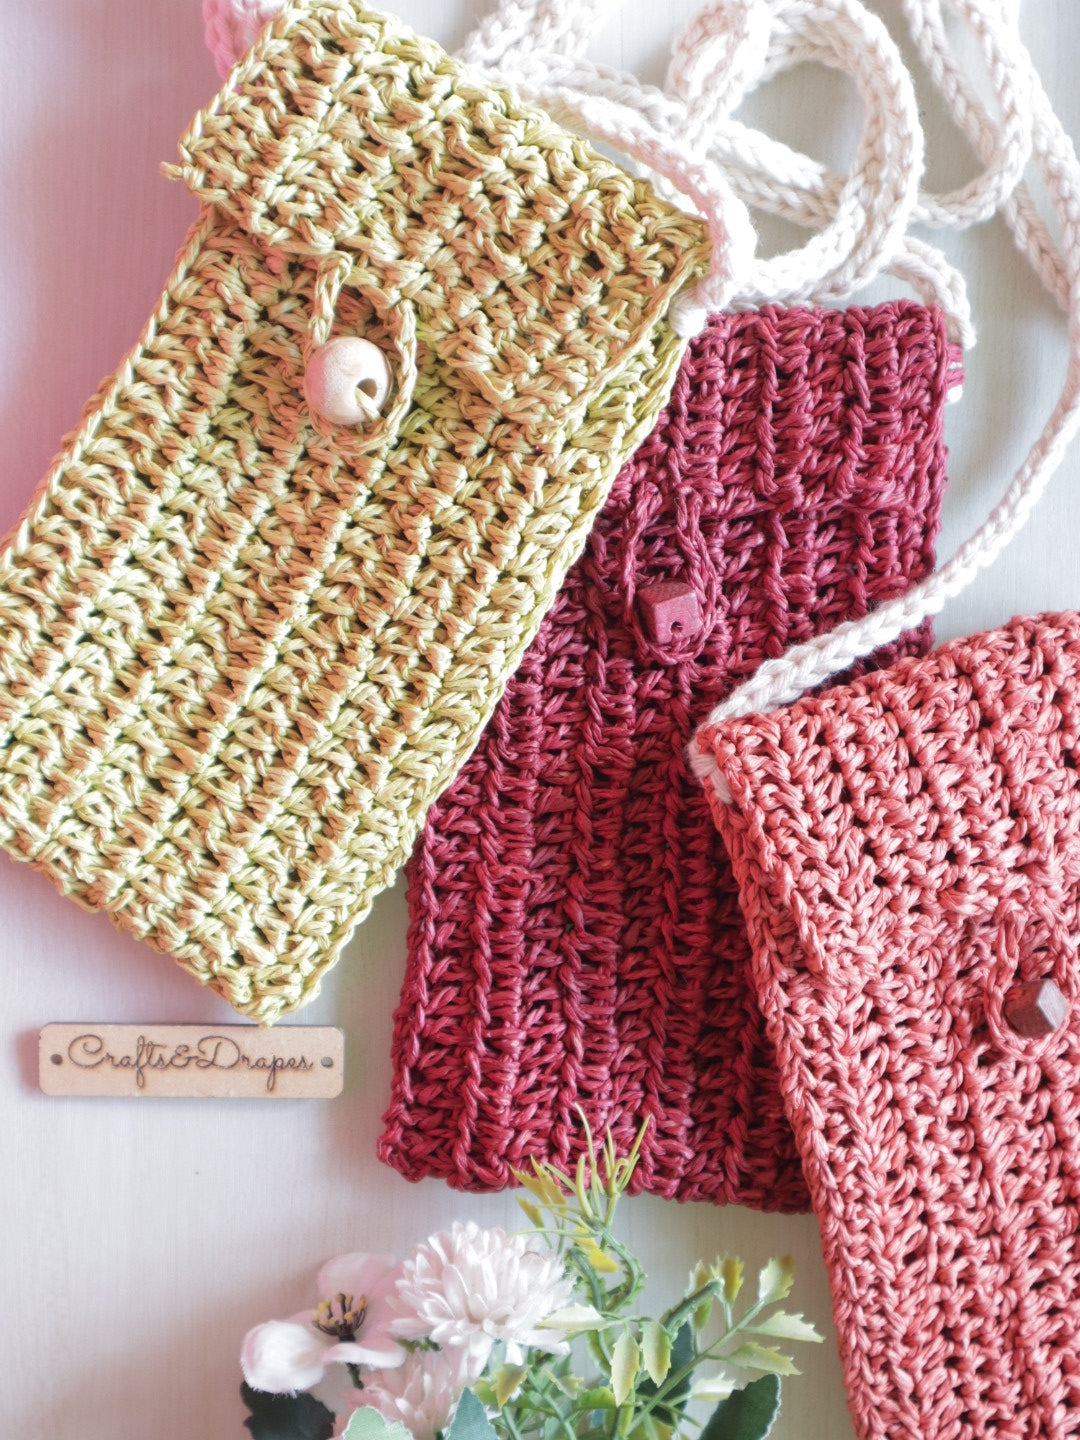 Crochet phone case - A stylish smartphone case for everyone!